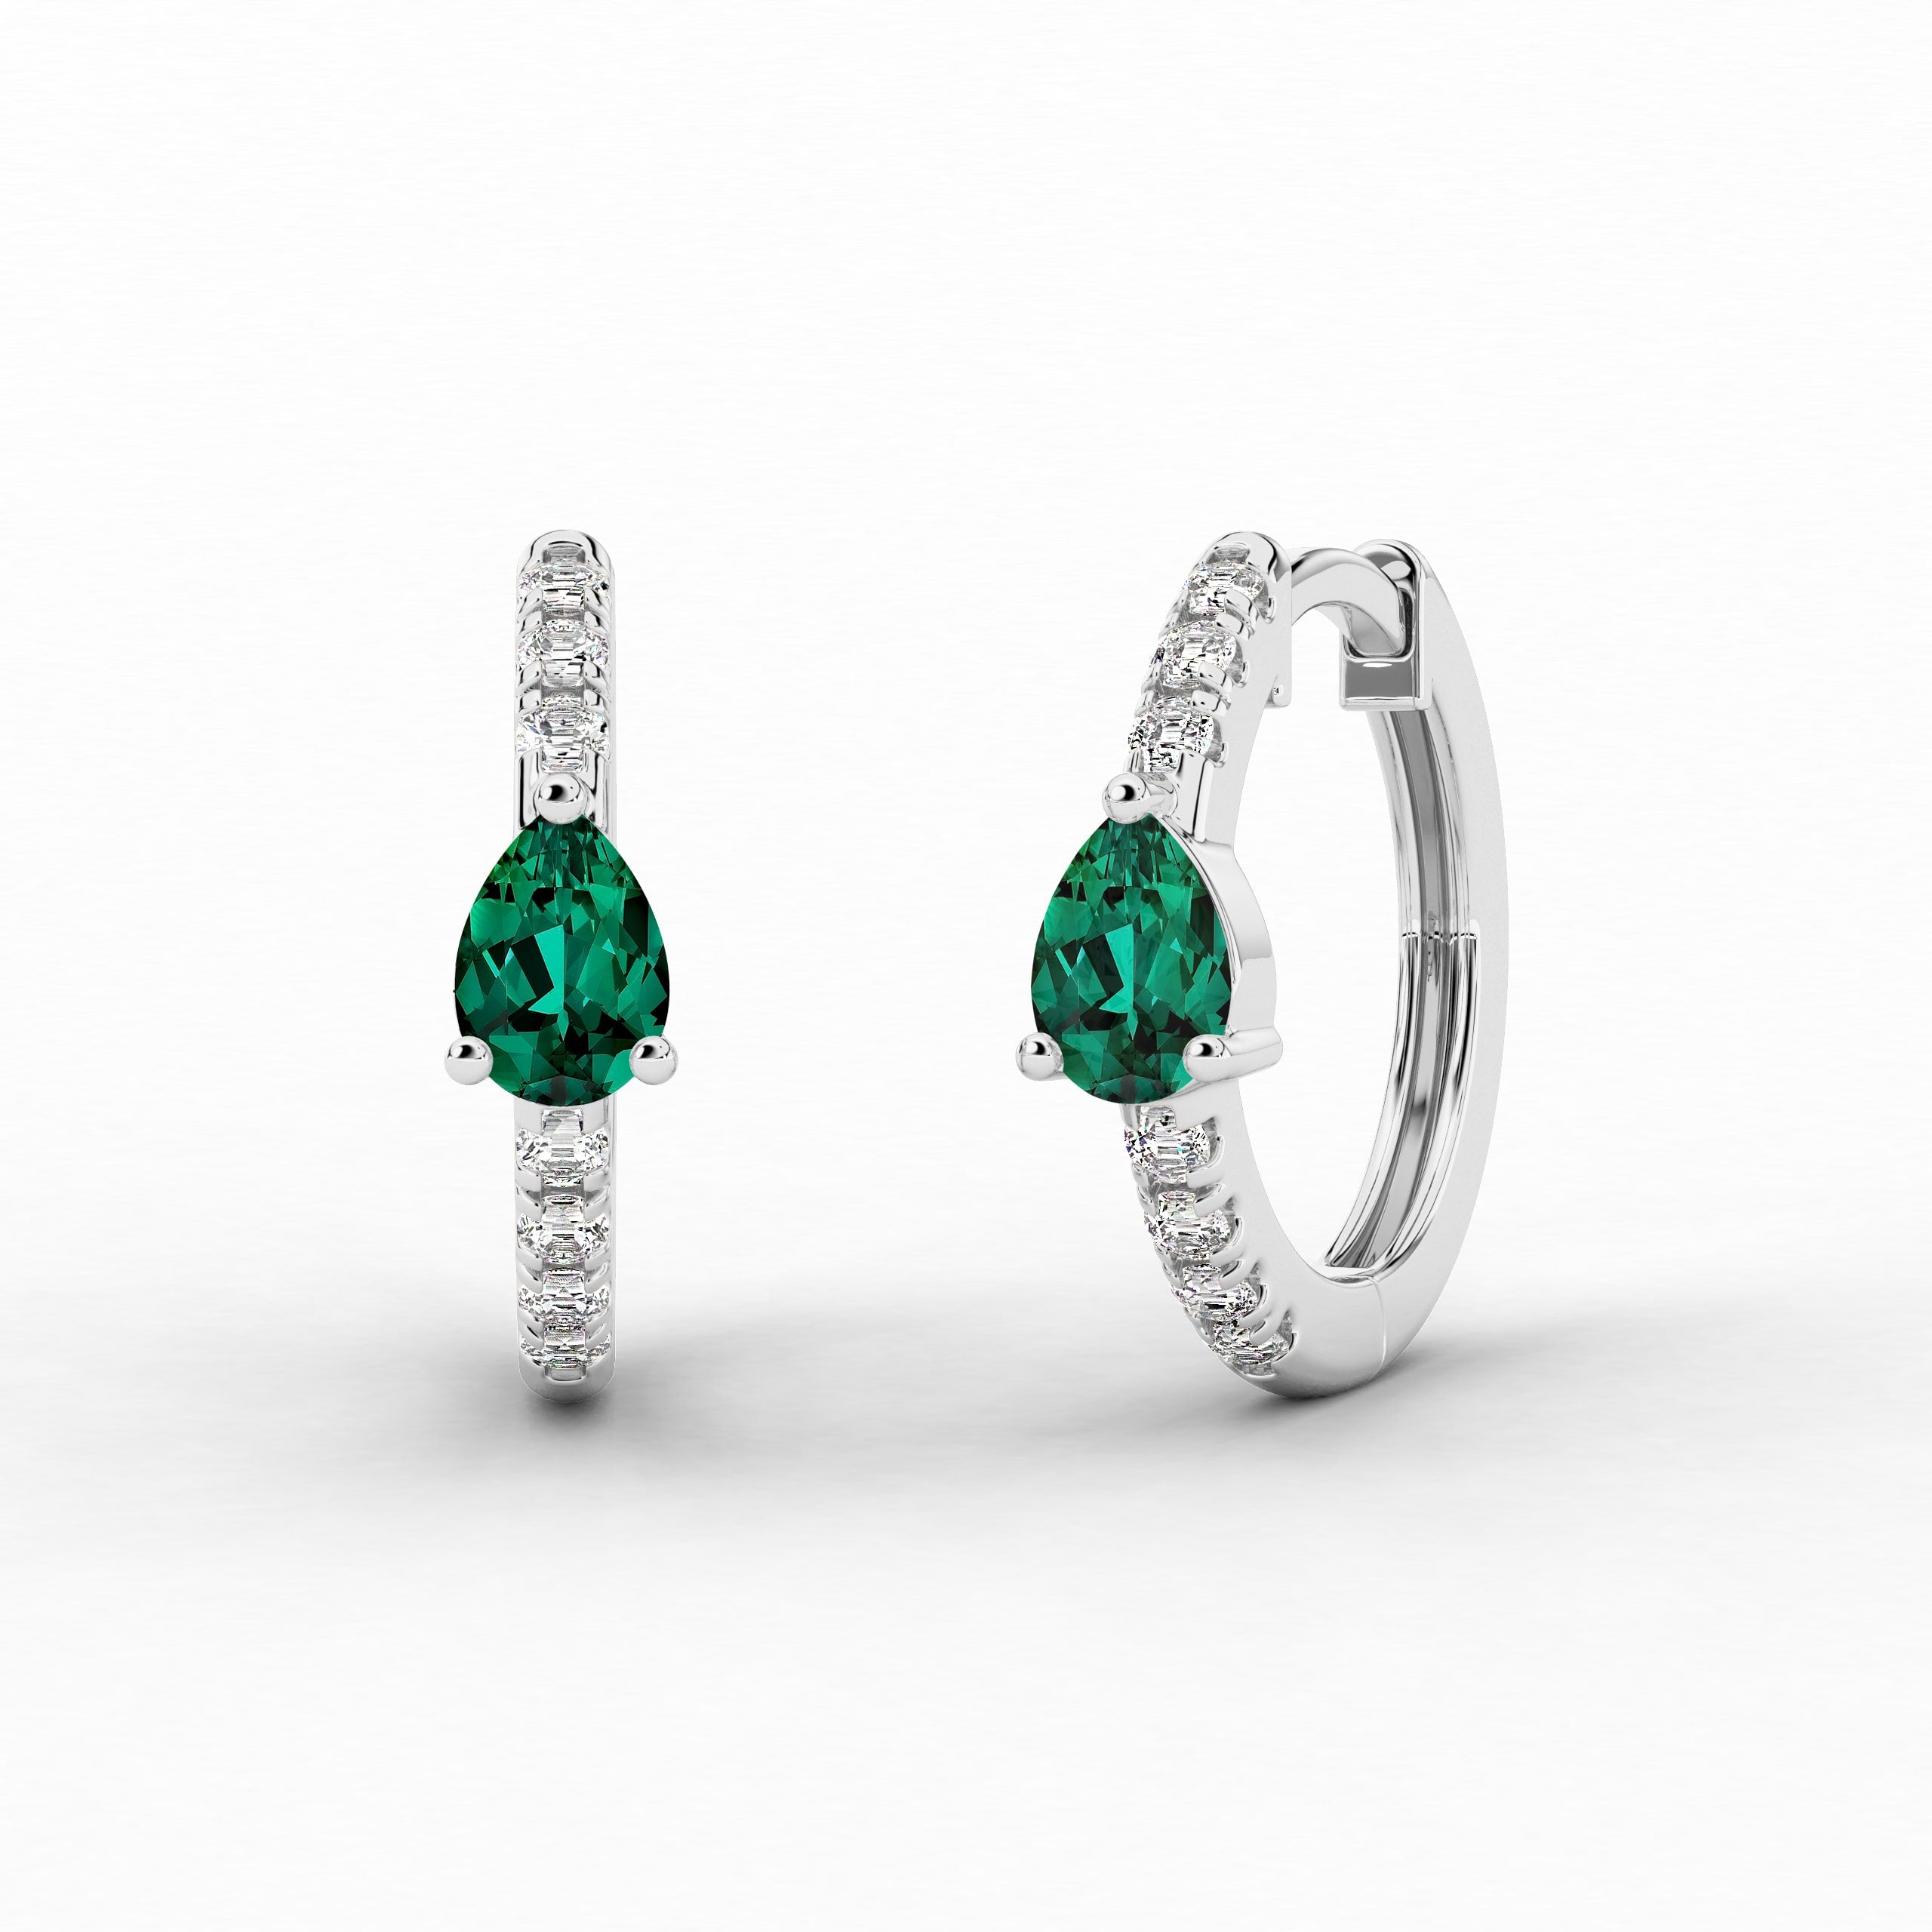 White Gold Hoop Earring In Pear And Green Emerald Cut Moissanite Diamond Wedding Gift For Woman